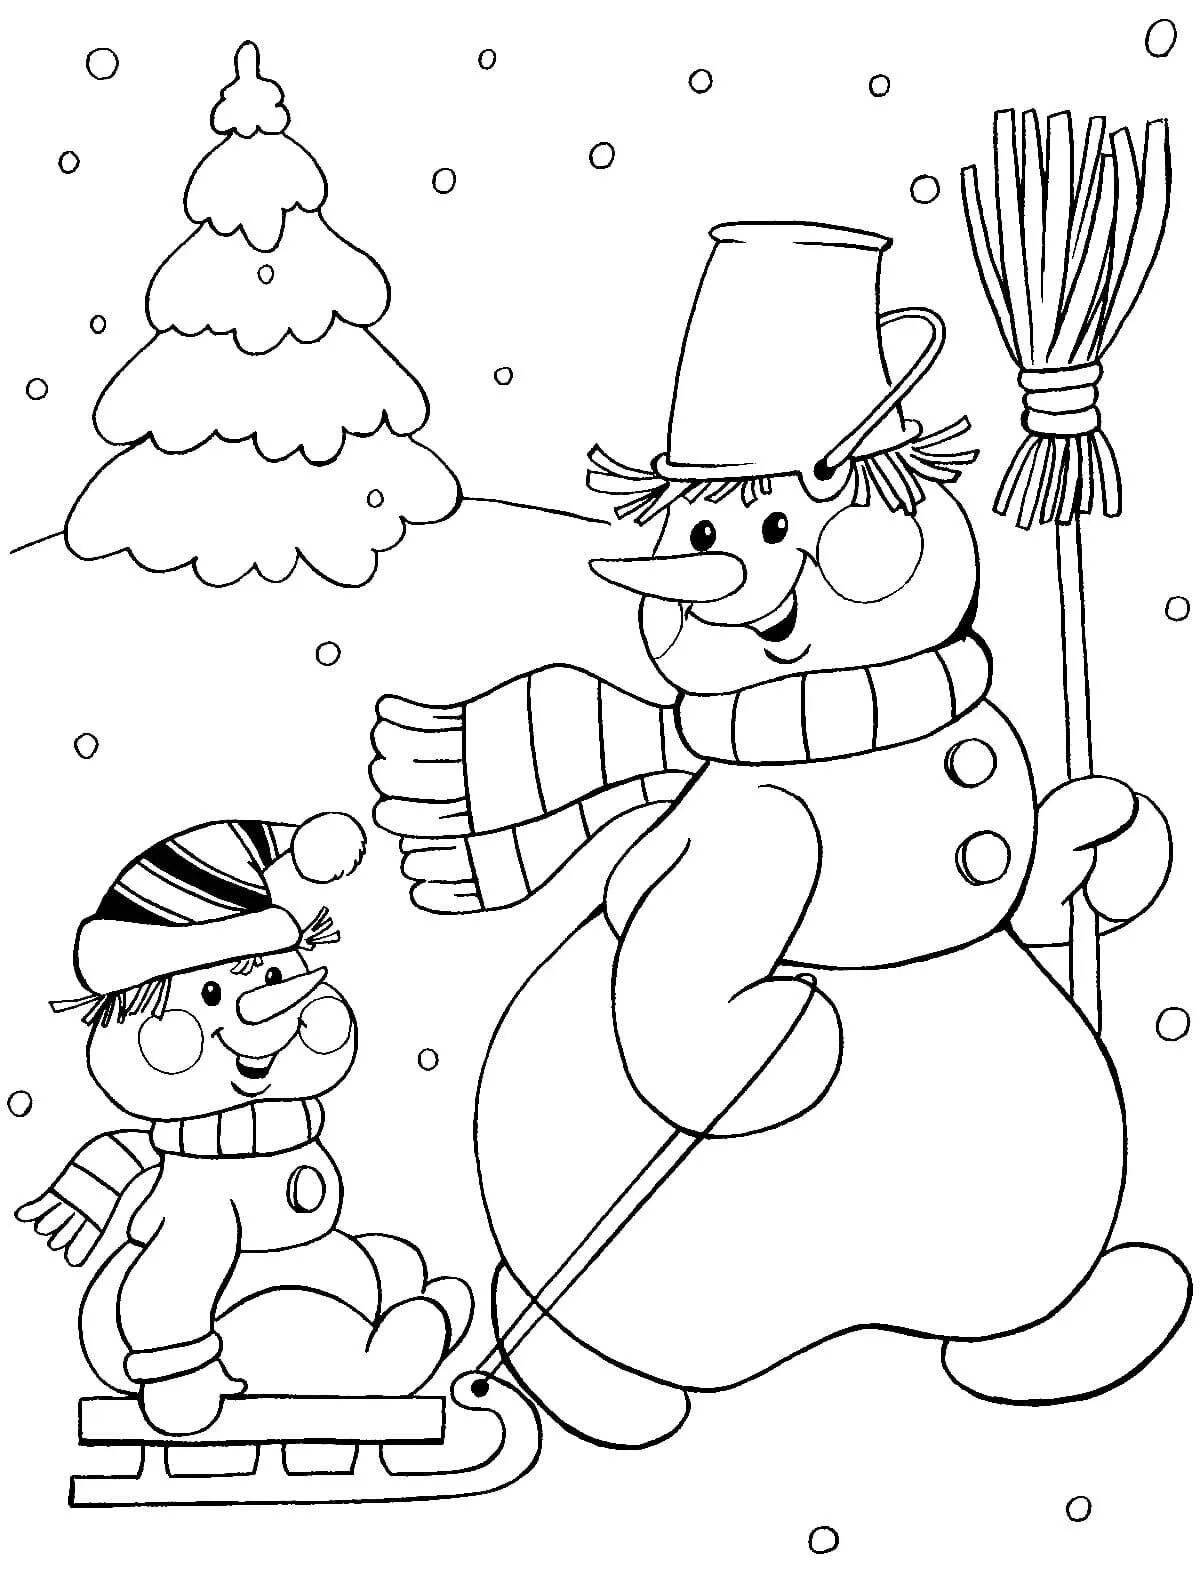 Coloring book exciting snowman day